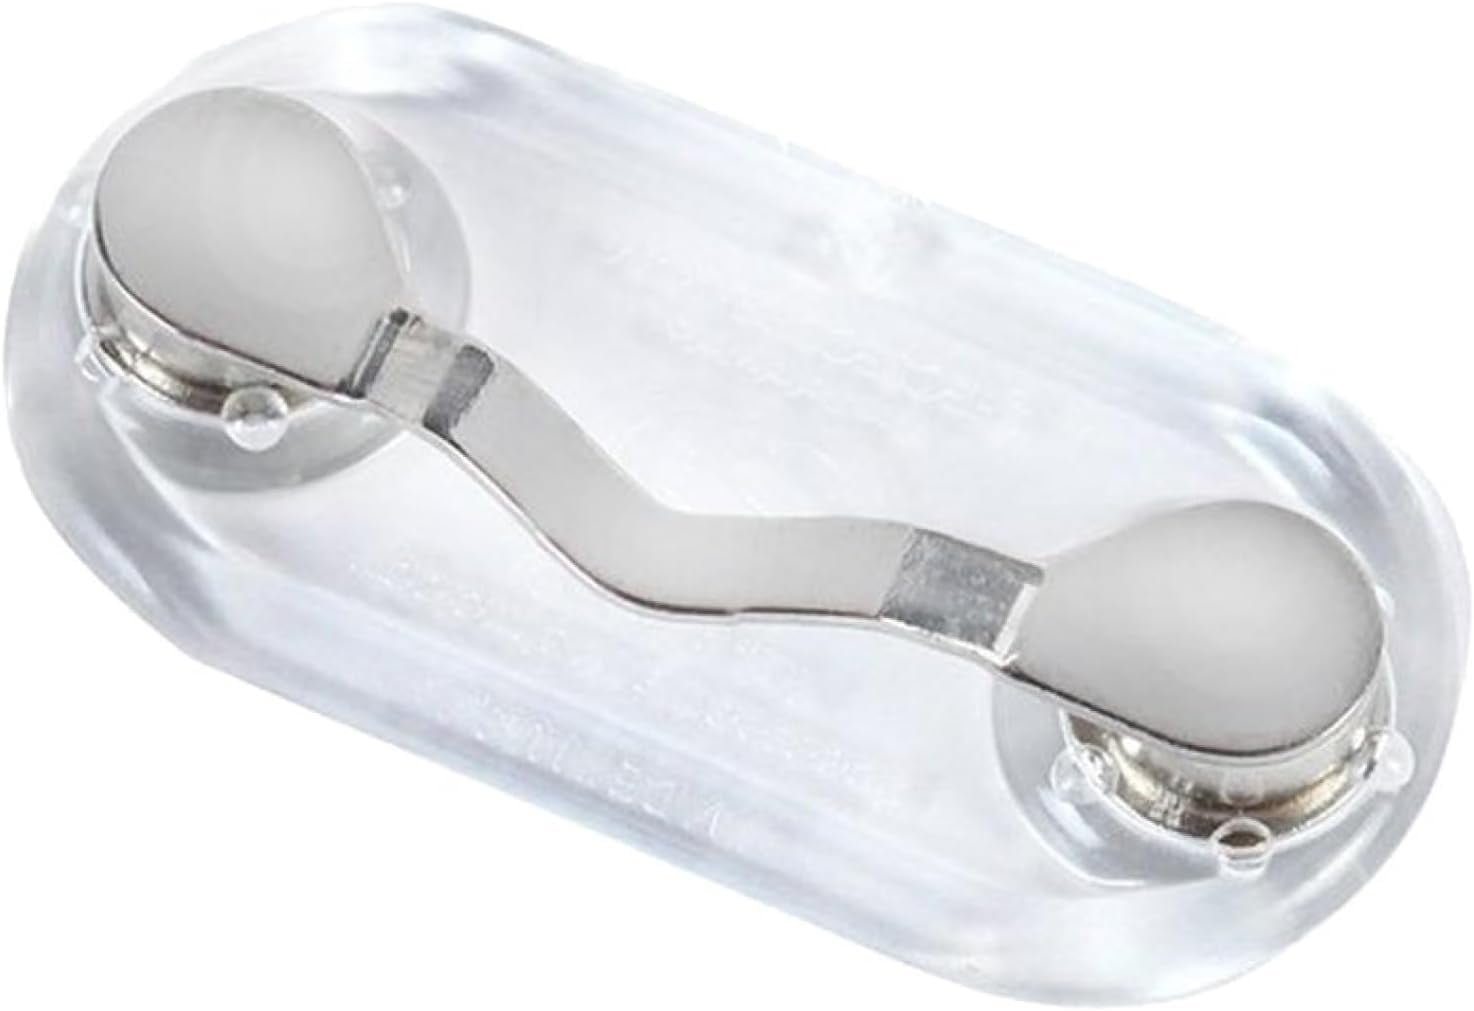 Stainless Steel Magnetic Eyeglass Holder with Shark Wire -- By EyeLoop™ --  Patented.